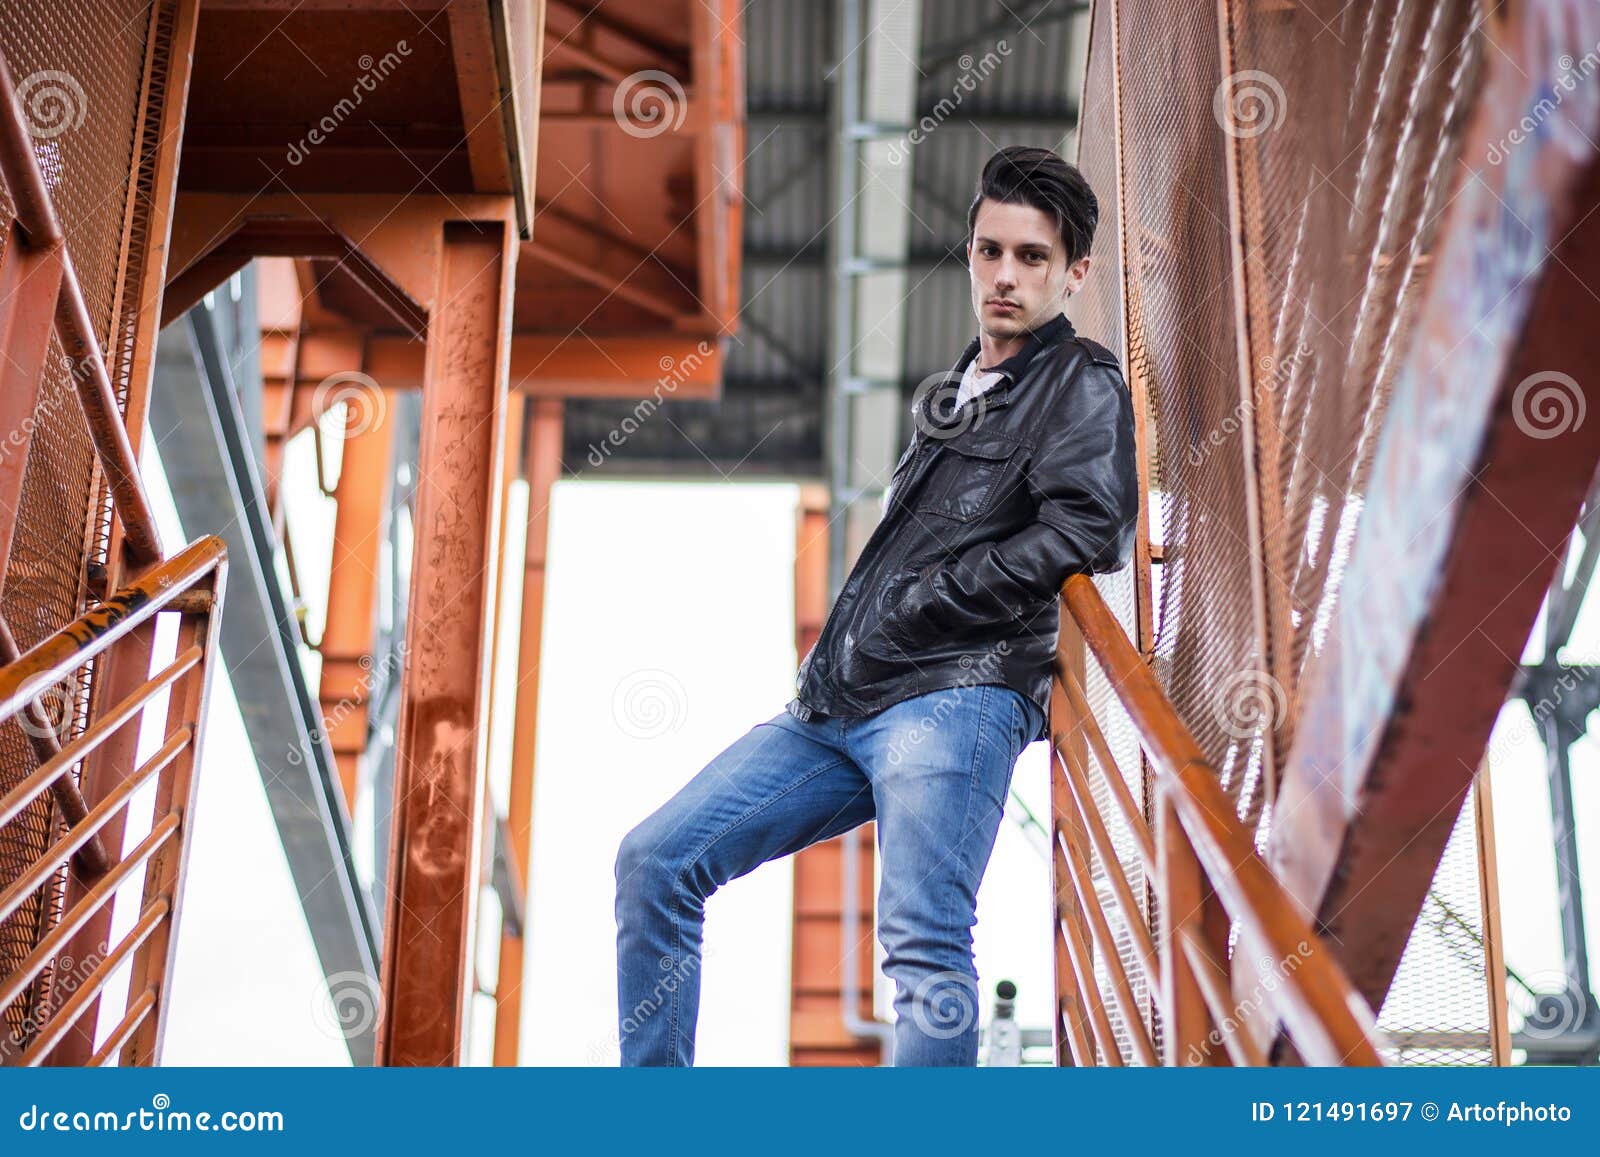 Young Man Standing Outdoors in Urban Setting Stock Image - Image of ...